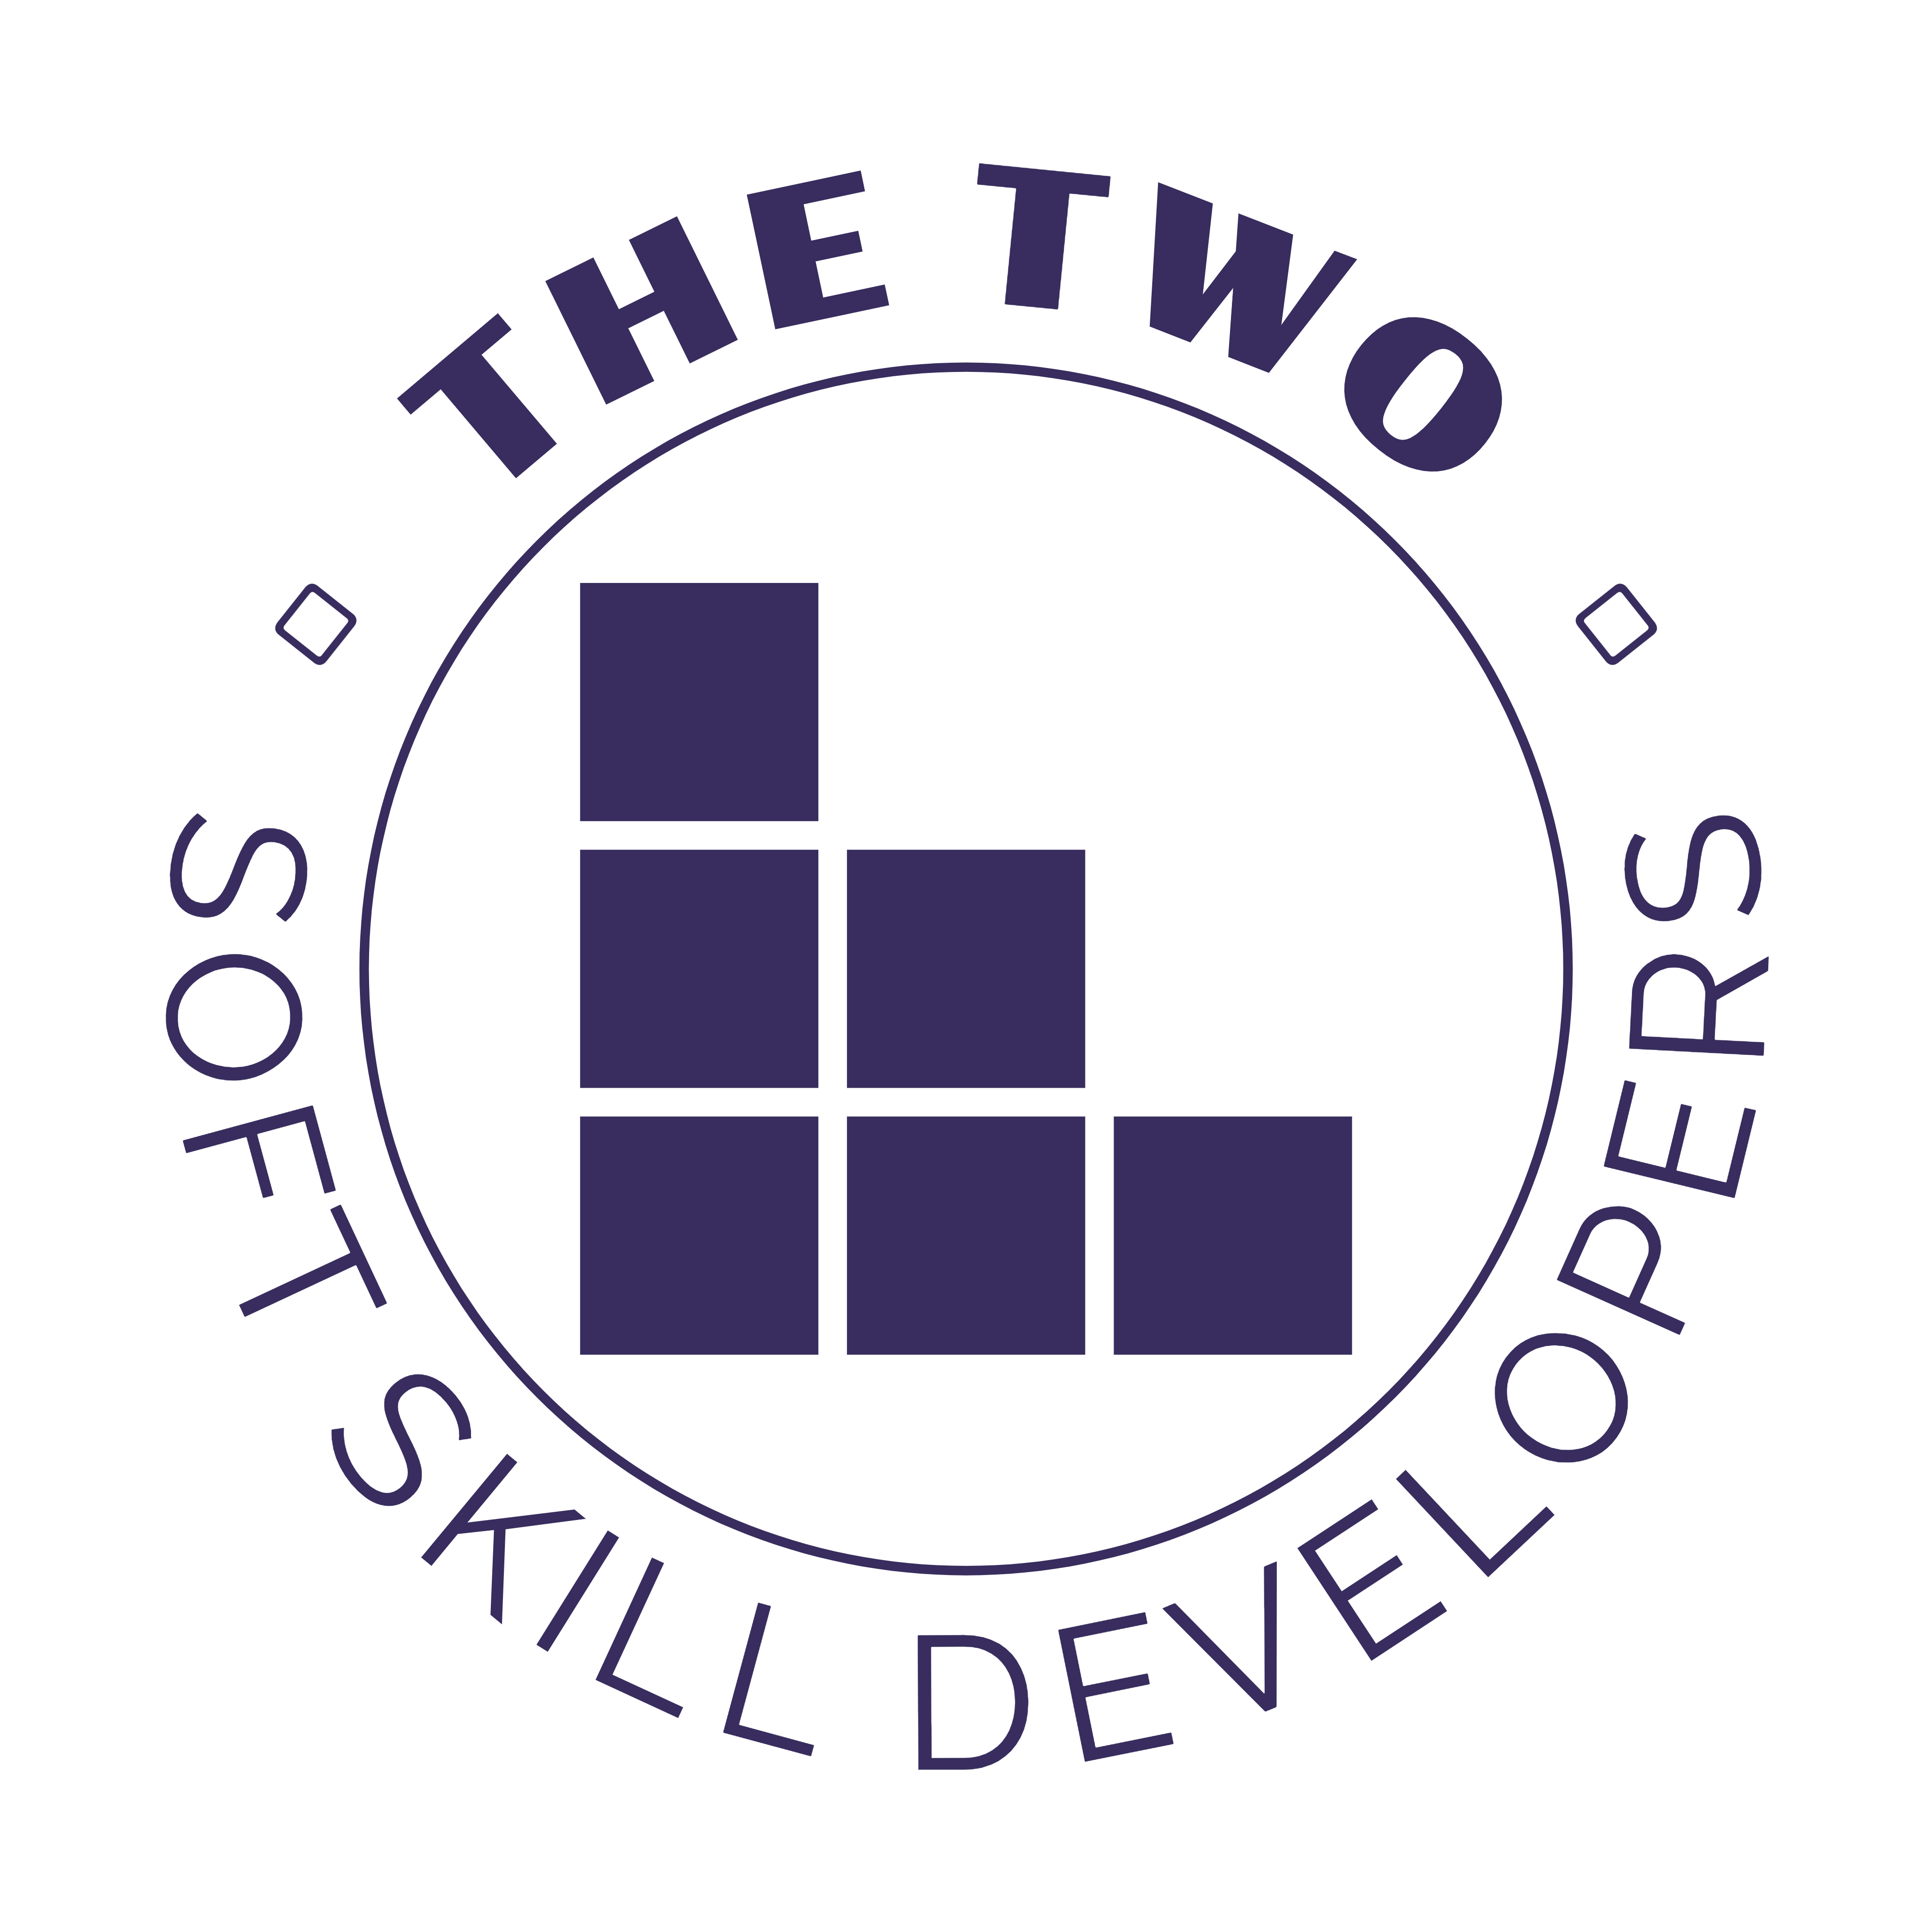 The Two Soft Skills Developers logo